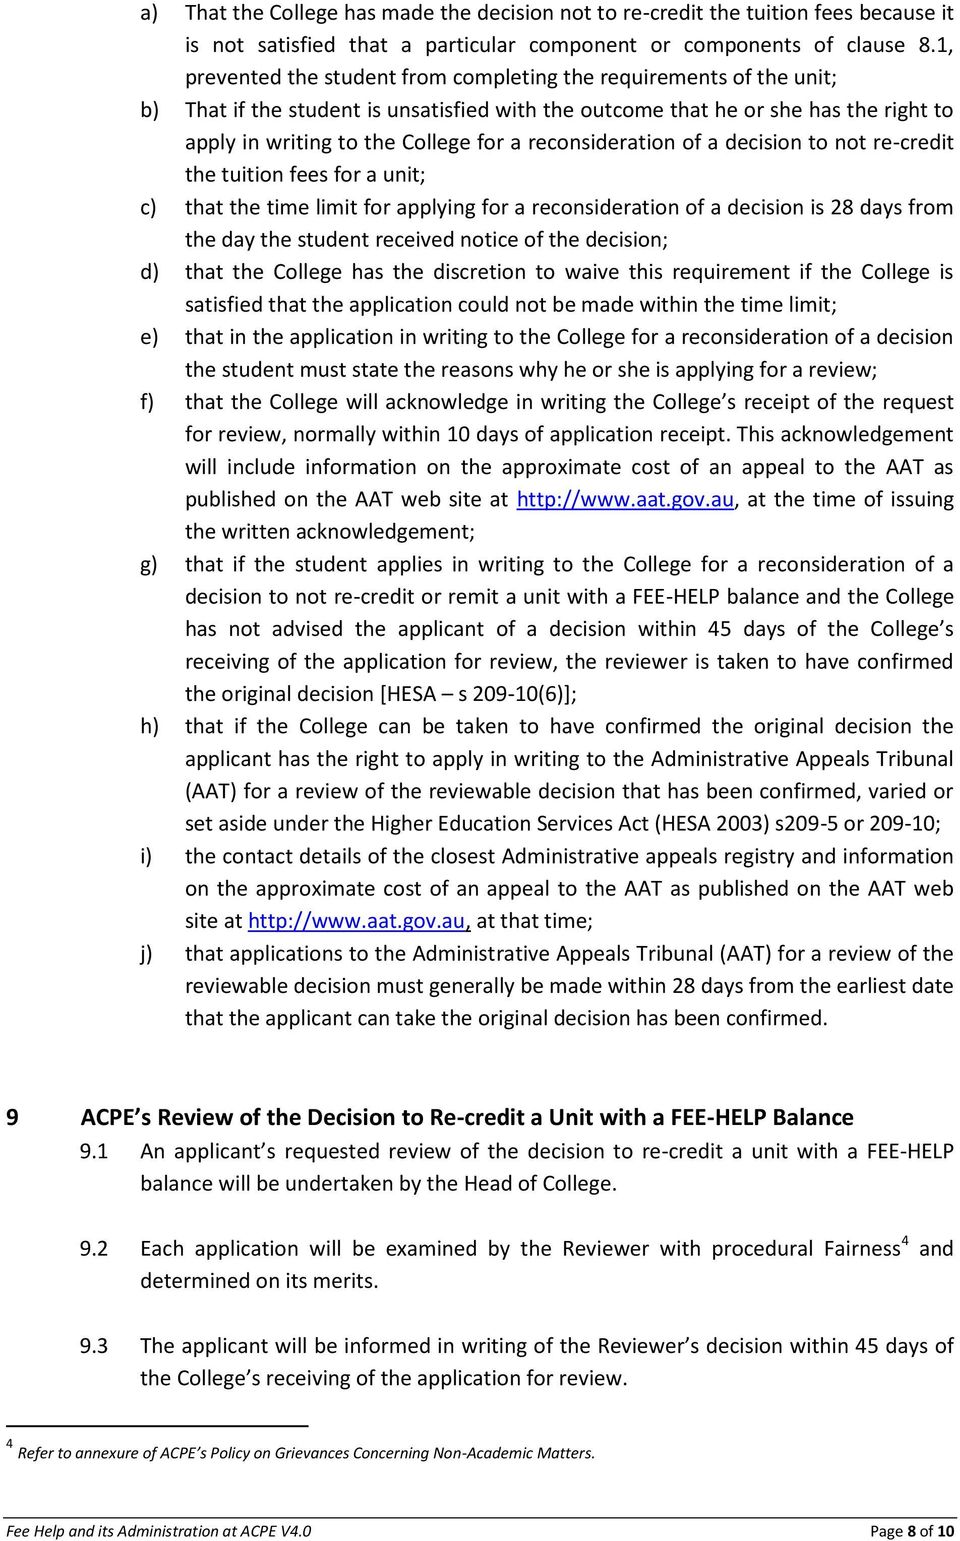 reconsideration of a decision to not re-credit the tuition fees for a unit; c) that the time limit for applying for a reconsideration of a decision is 28 days from the day the student received notice